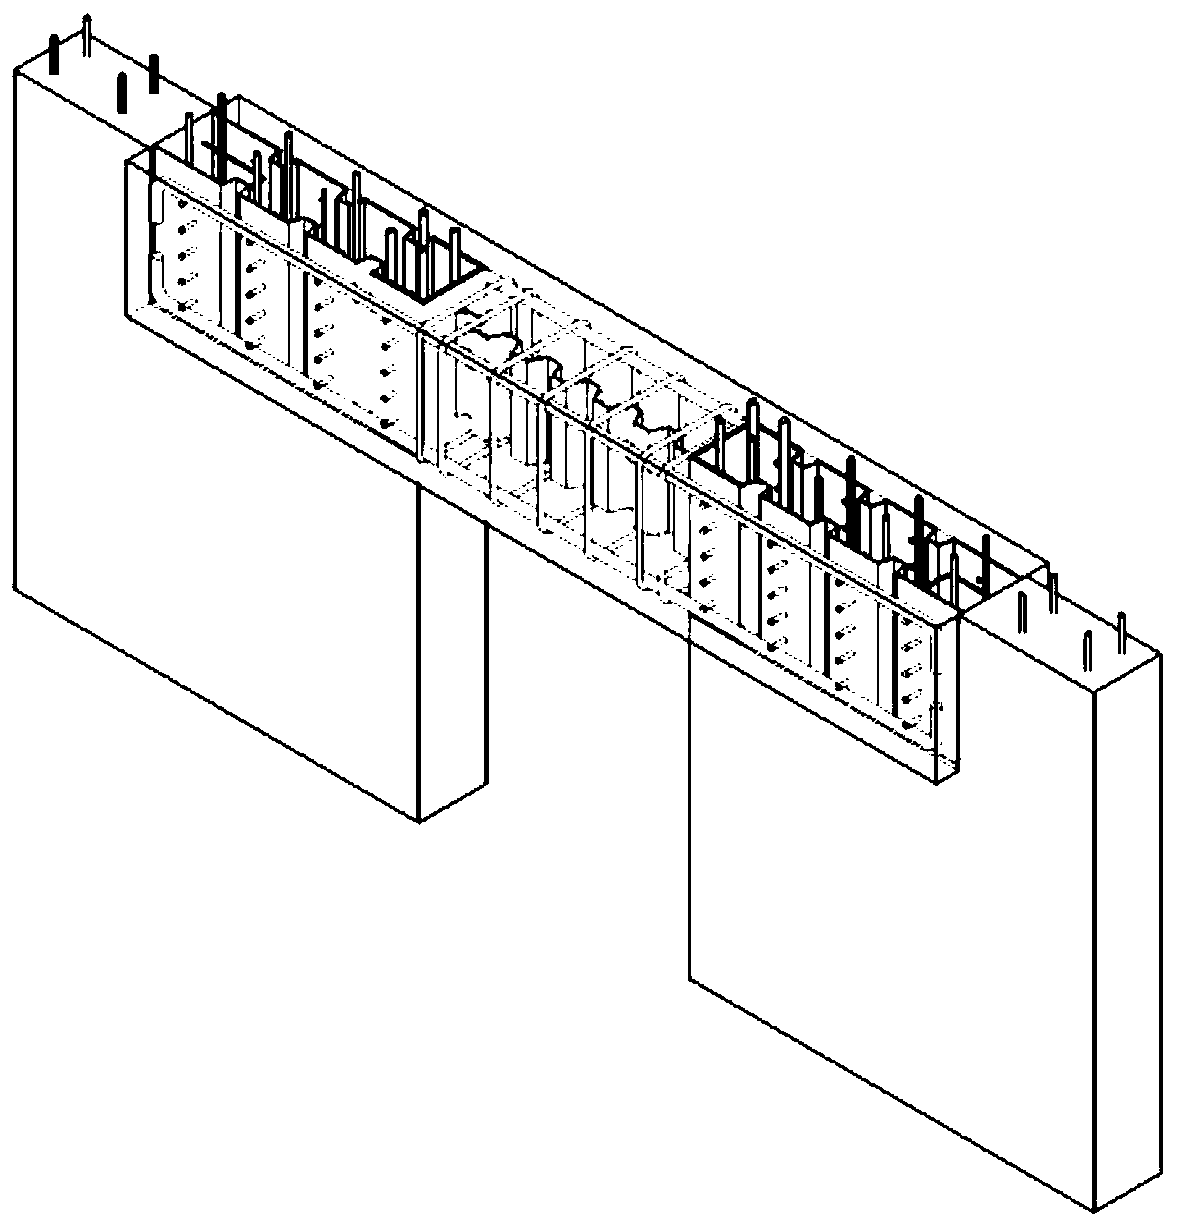 An Assembled Coupling Beam with Built-in Profiled Steel Groove Structure